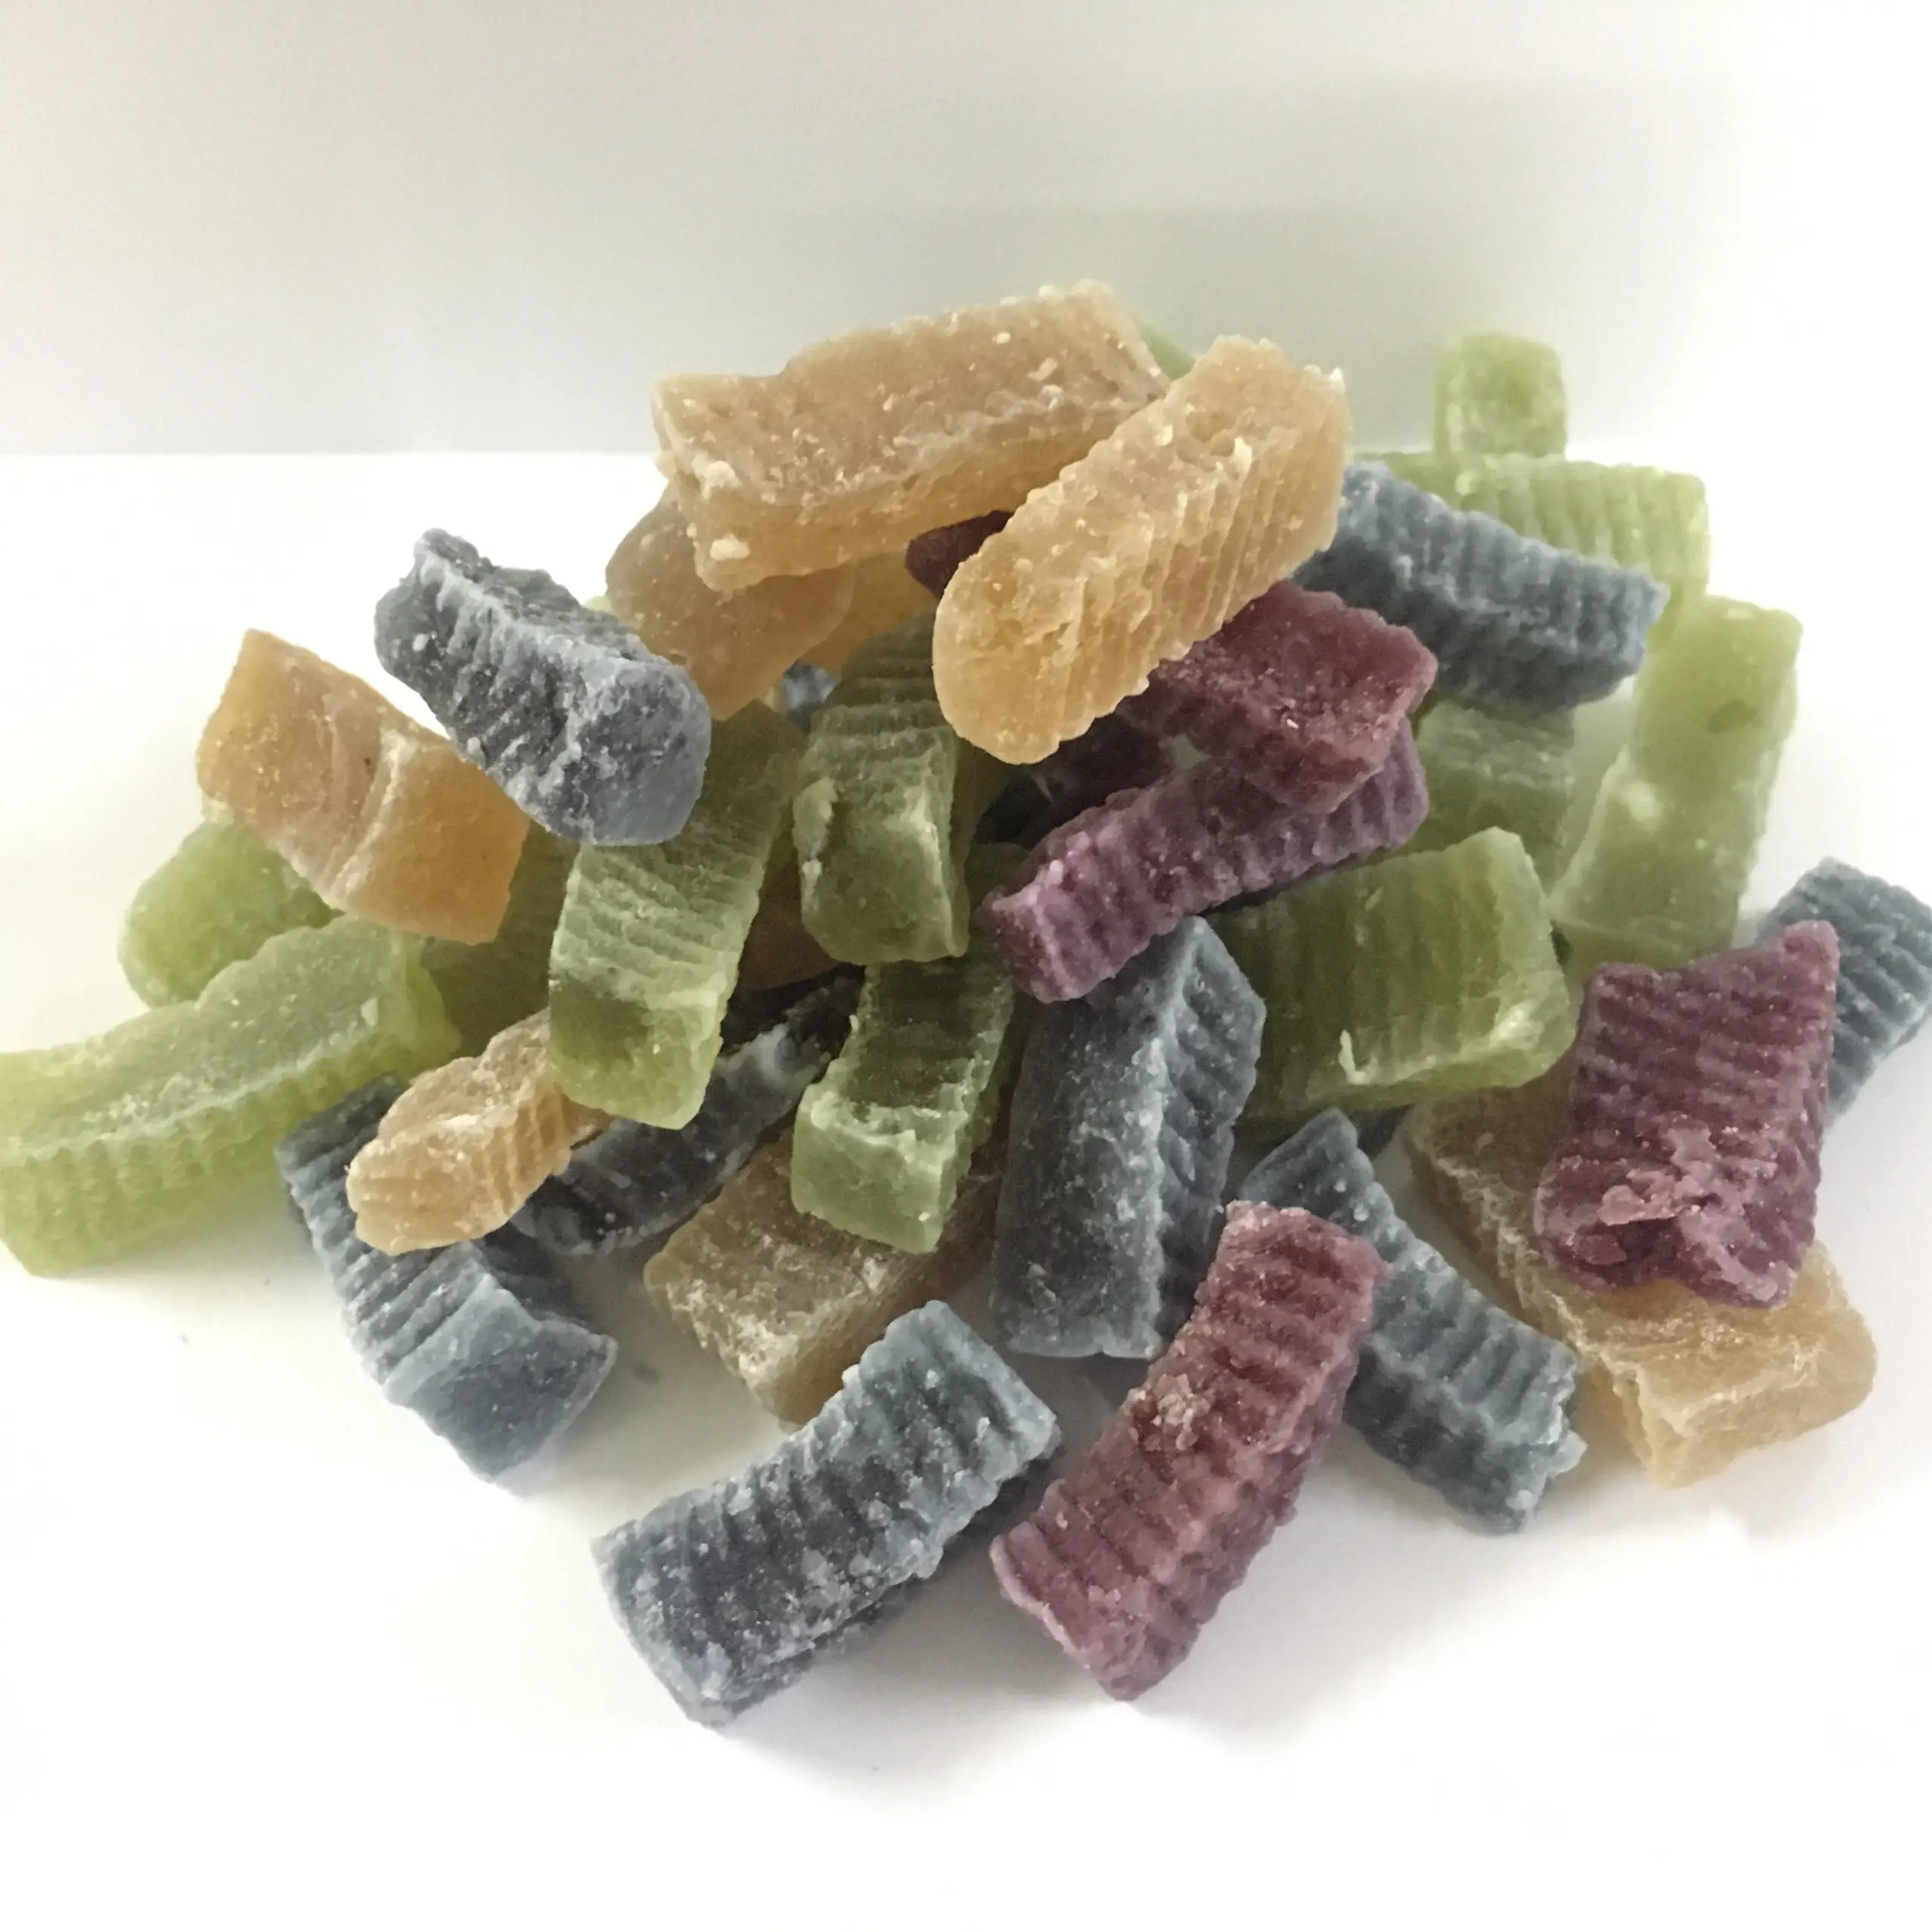 [HOT] Sea Moss Candy Irish Moss Gummies 5 Flavors Boots Immune System - Ms. May (84) 904 183 651